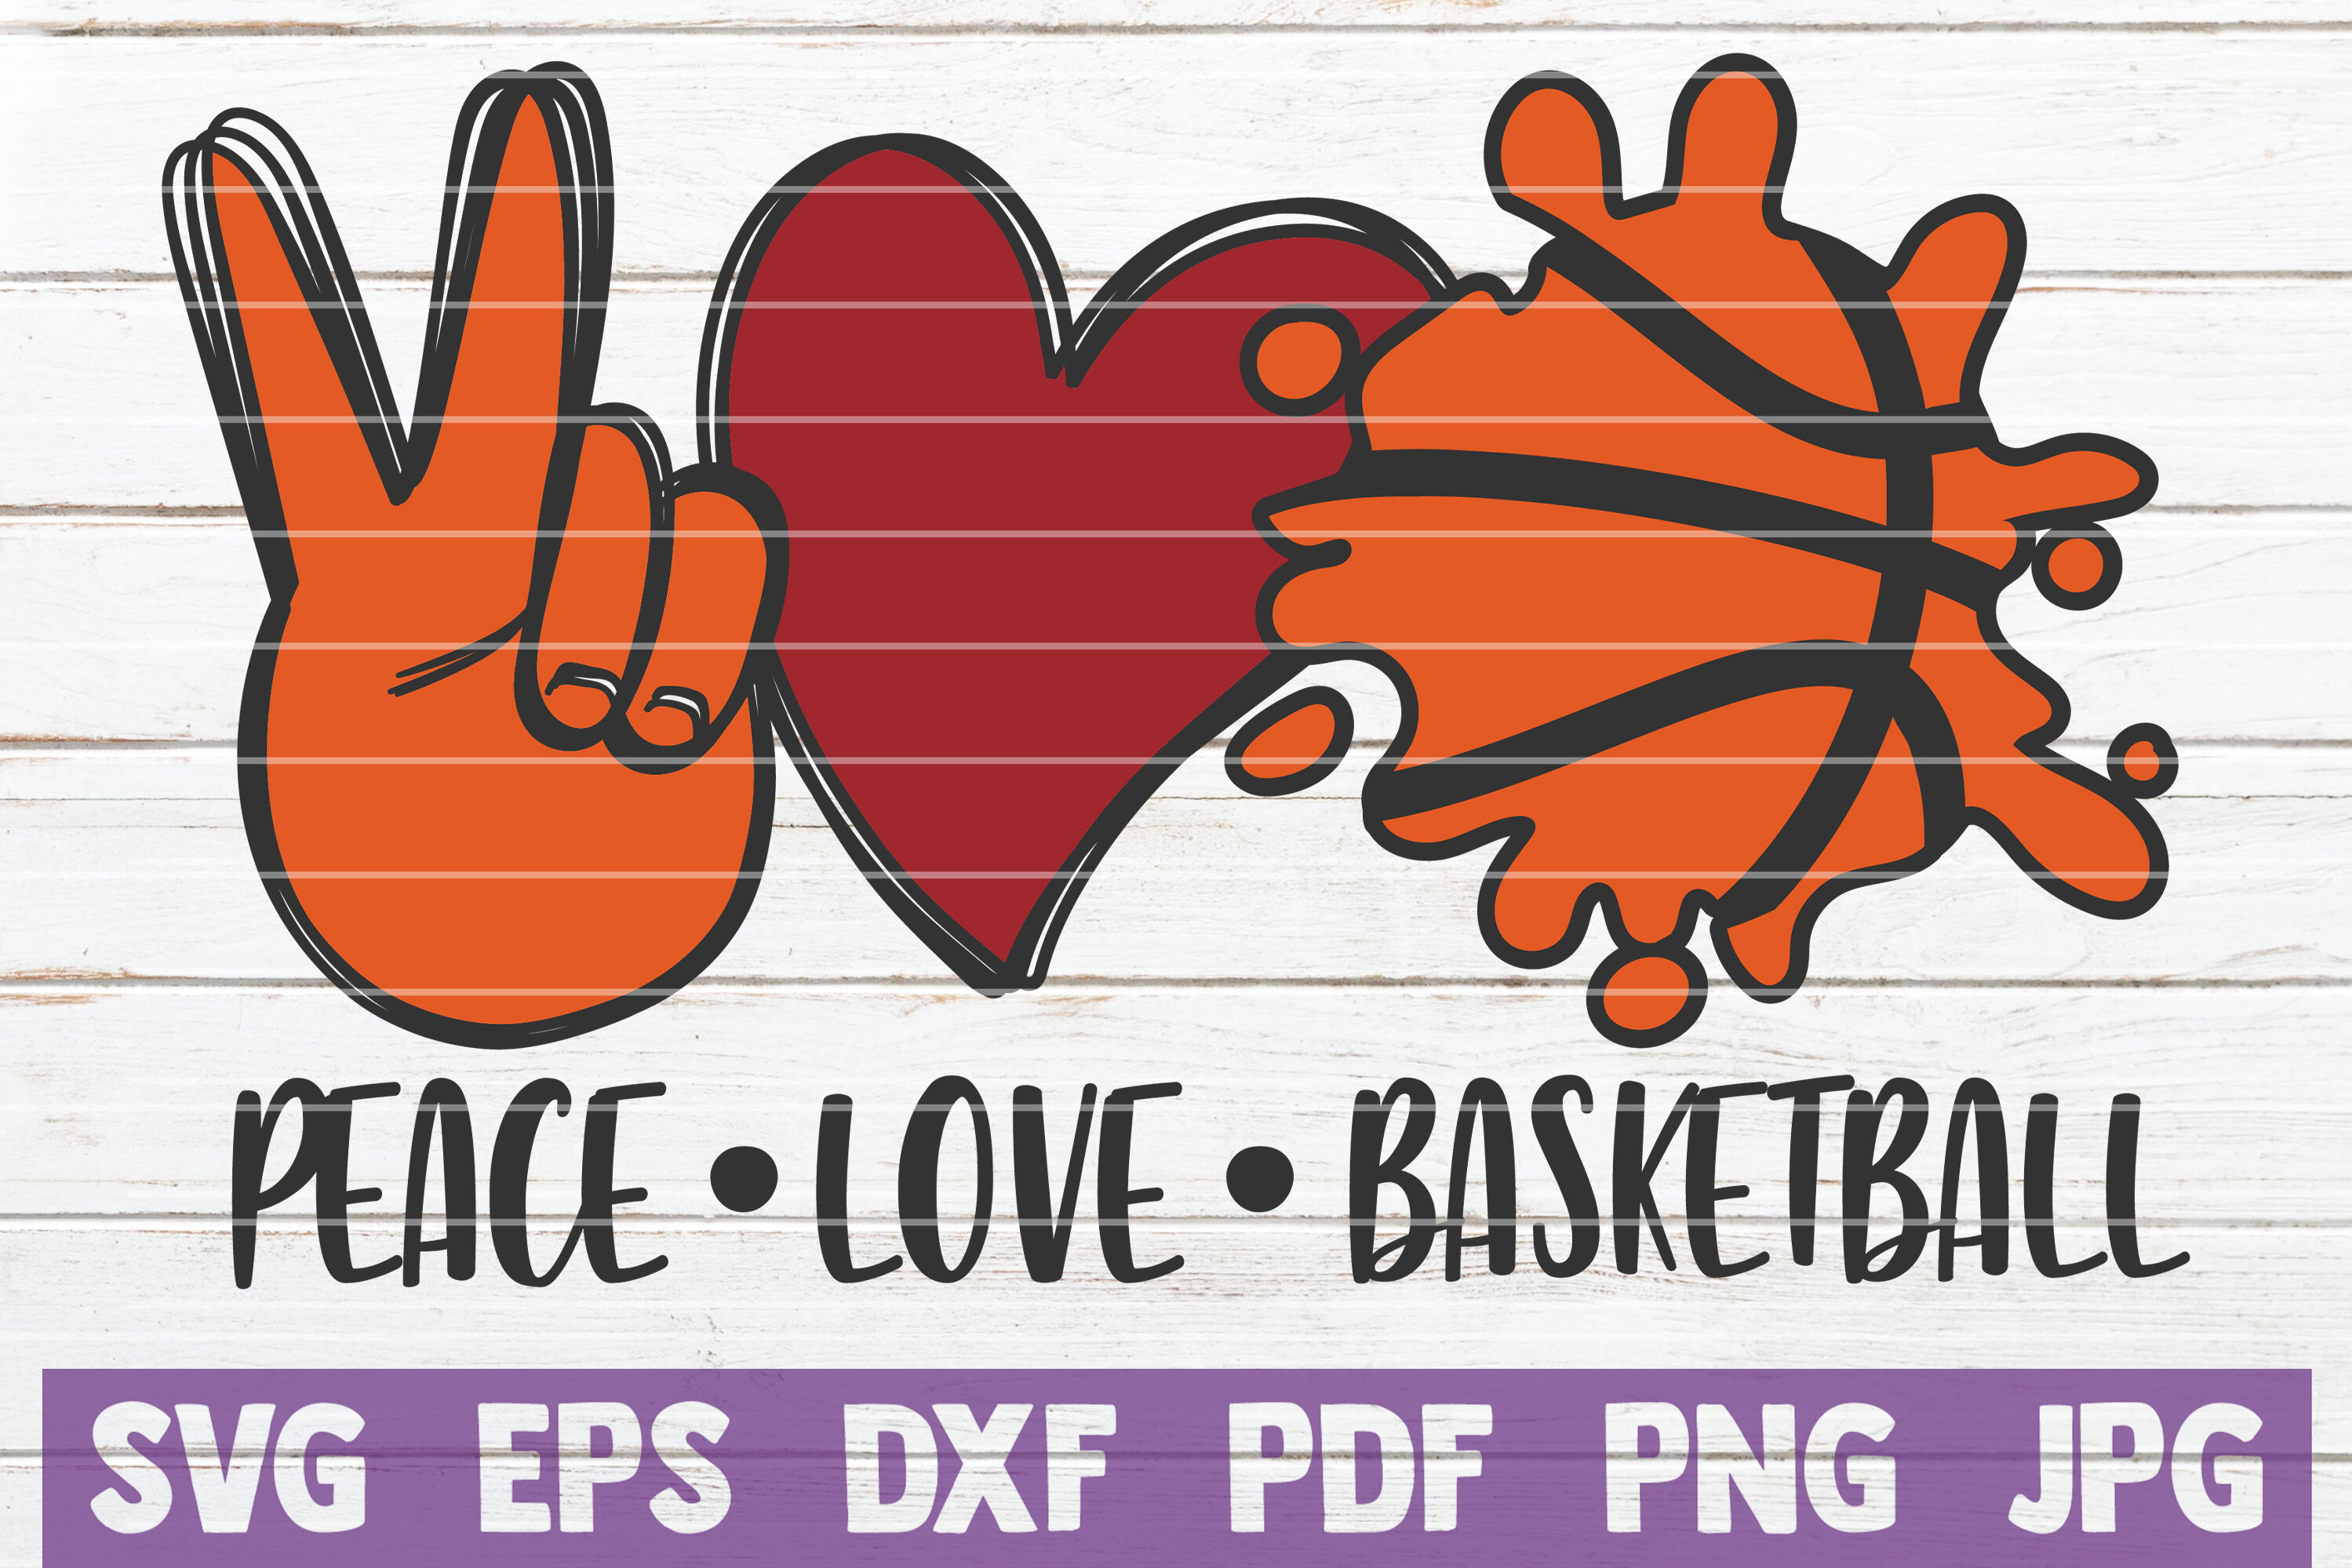 Download Peace Love Basketball Svg Cut File By Mintymarshmallows Thehungryjpeg Com